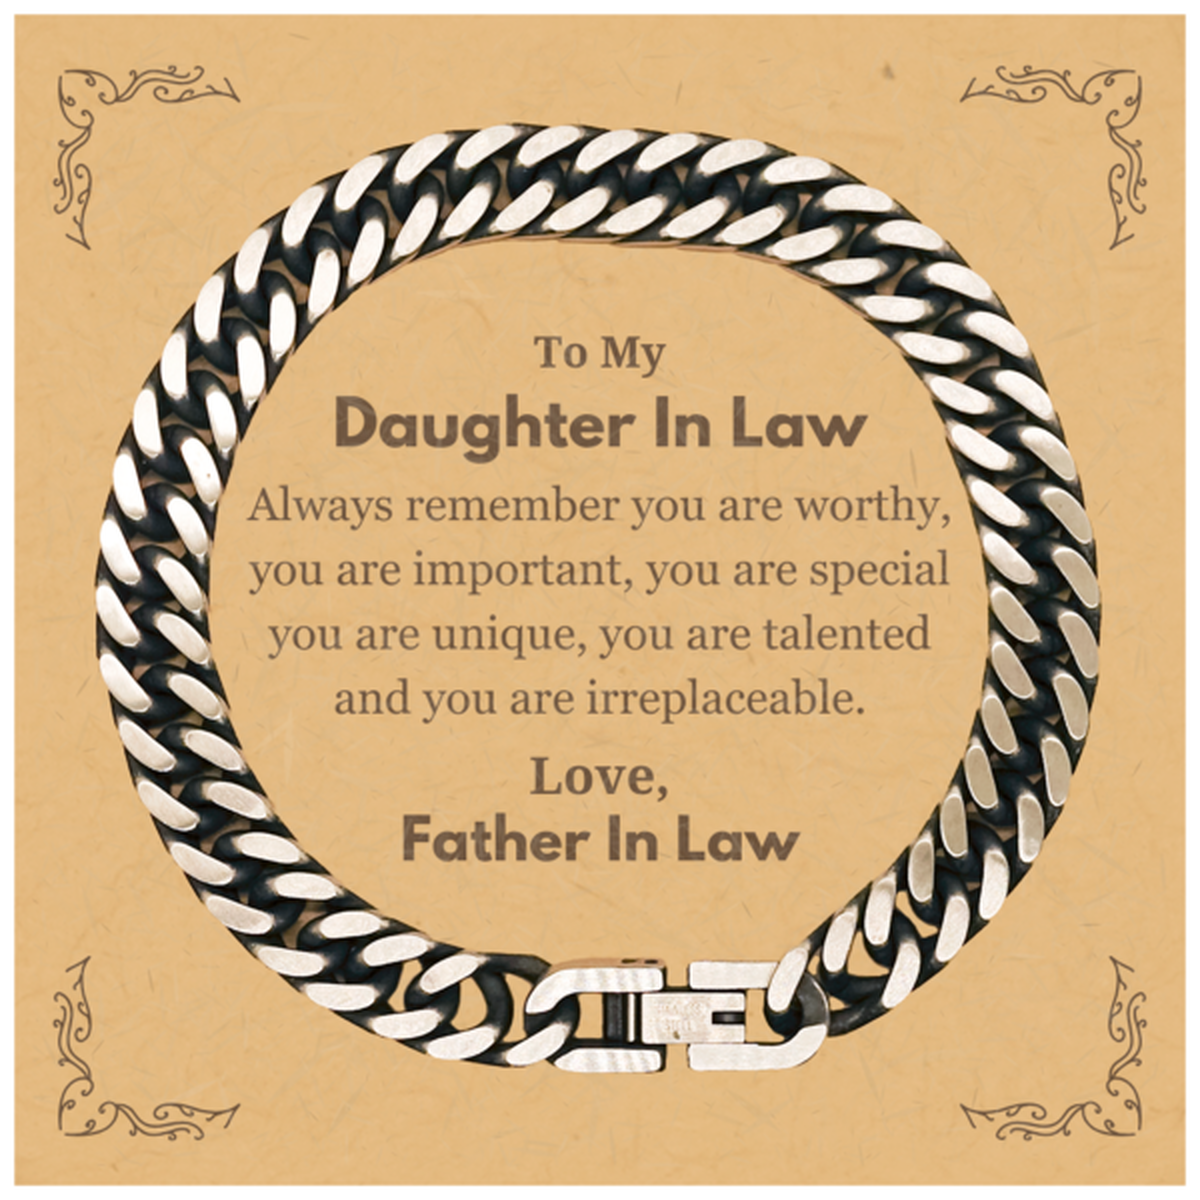 Daughter In Law Birthday Gifts from Father In Law, Inspirational Cuban Link Chain Bracelet for Daughter In Law Christmas Graduation Gifts for Daughter In Law Always remember you are worthy, you are important. Love, Father In Law